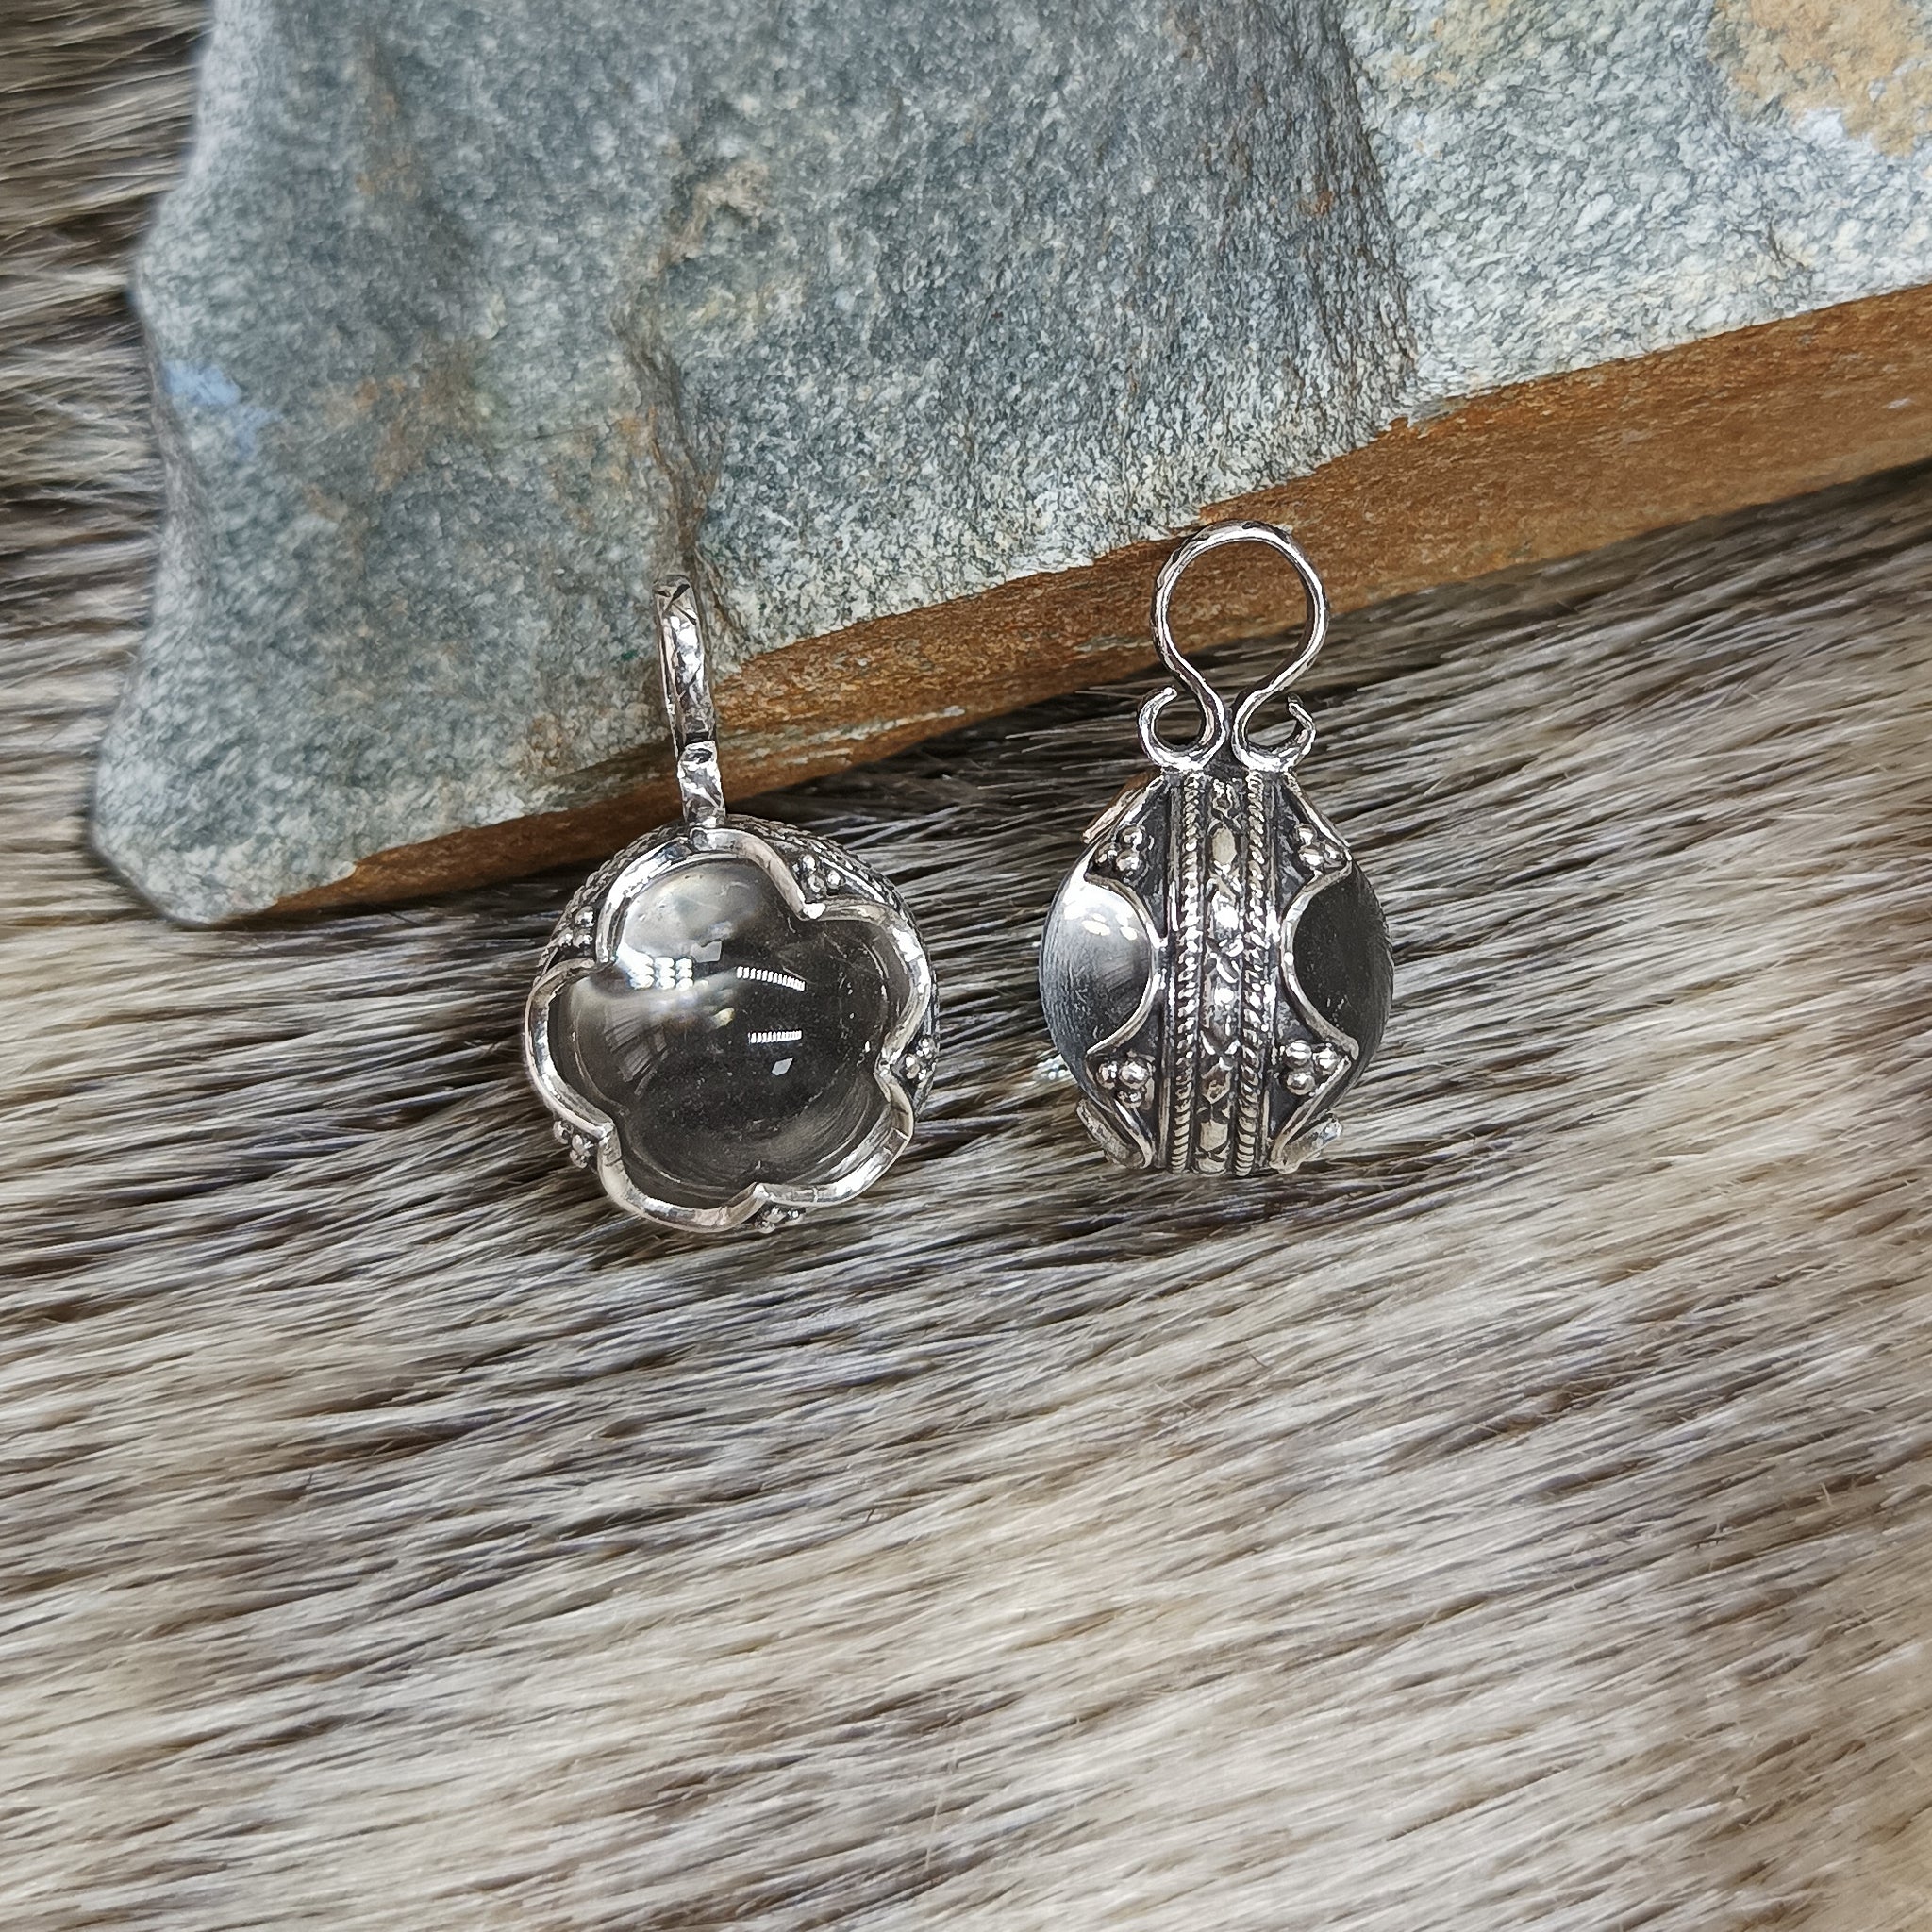 Small Silver Gotland Crystal Ball Pendants - Front & Side View on Seal Skin